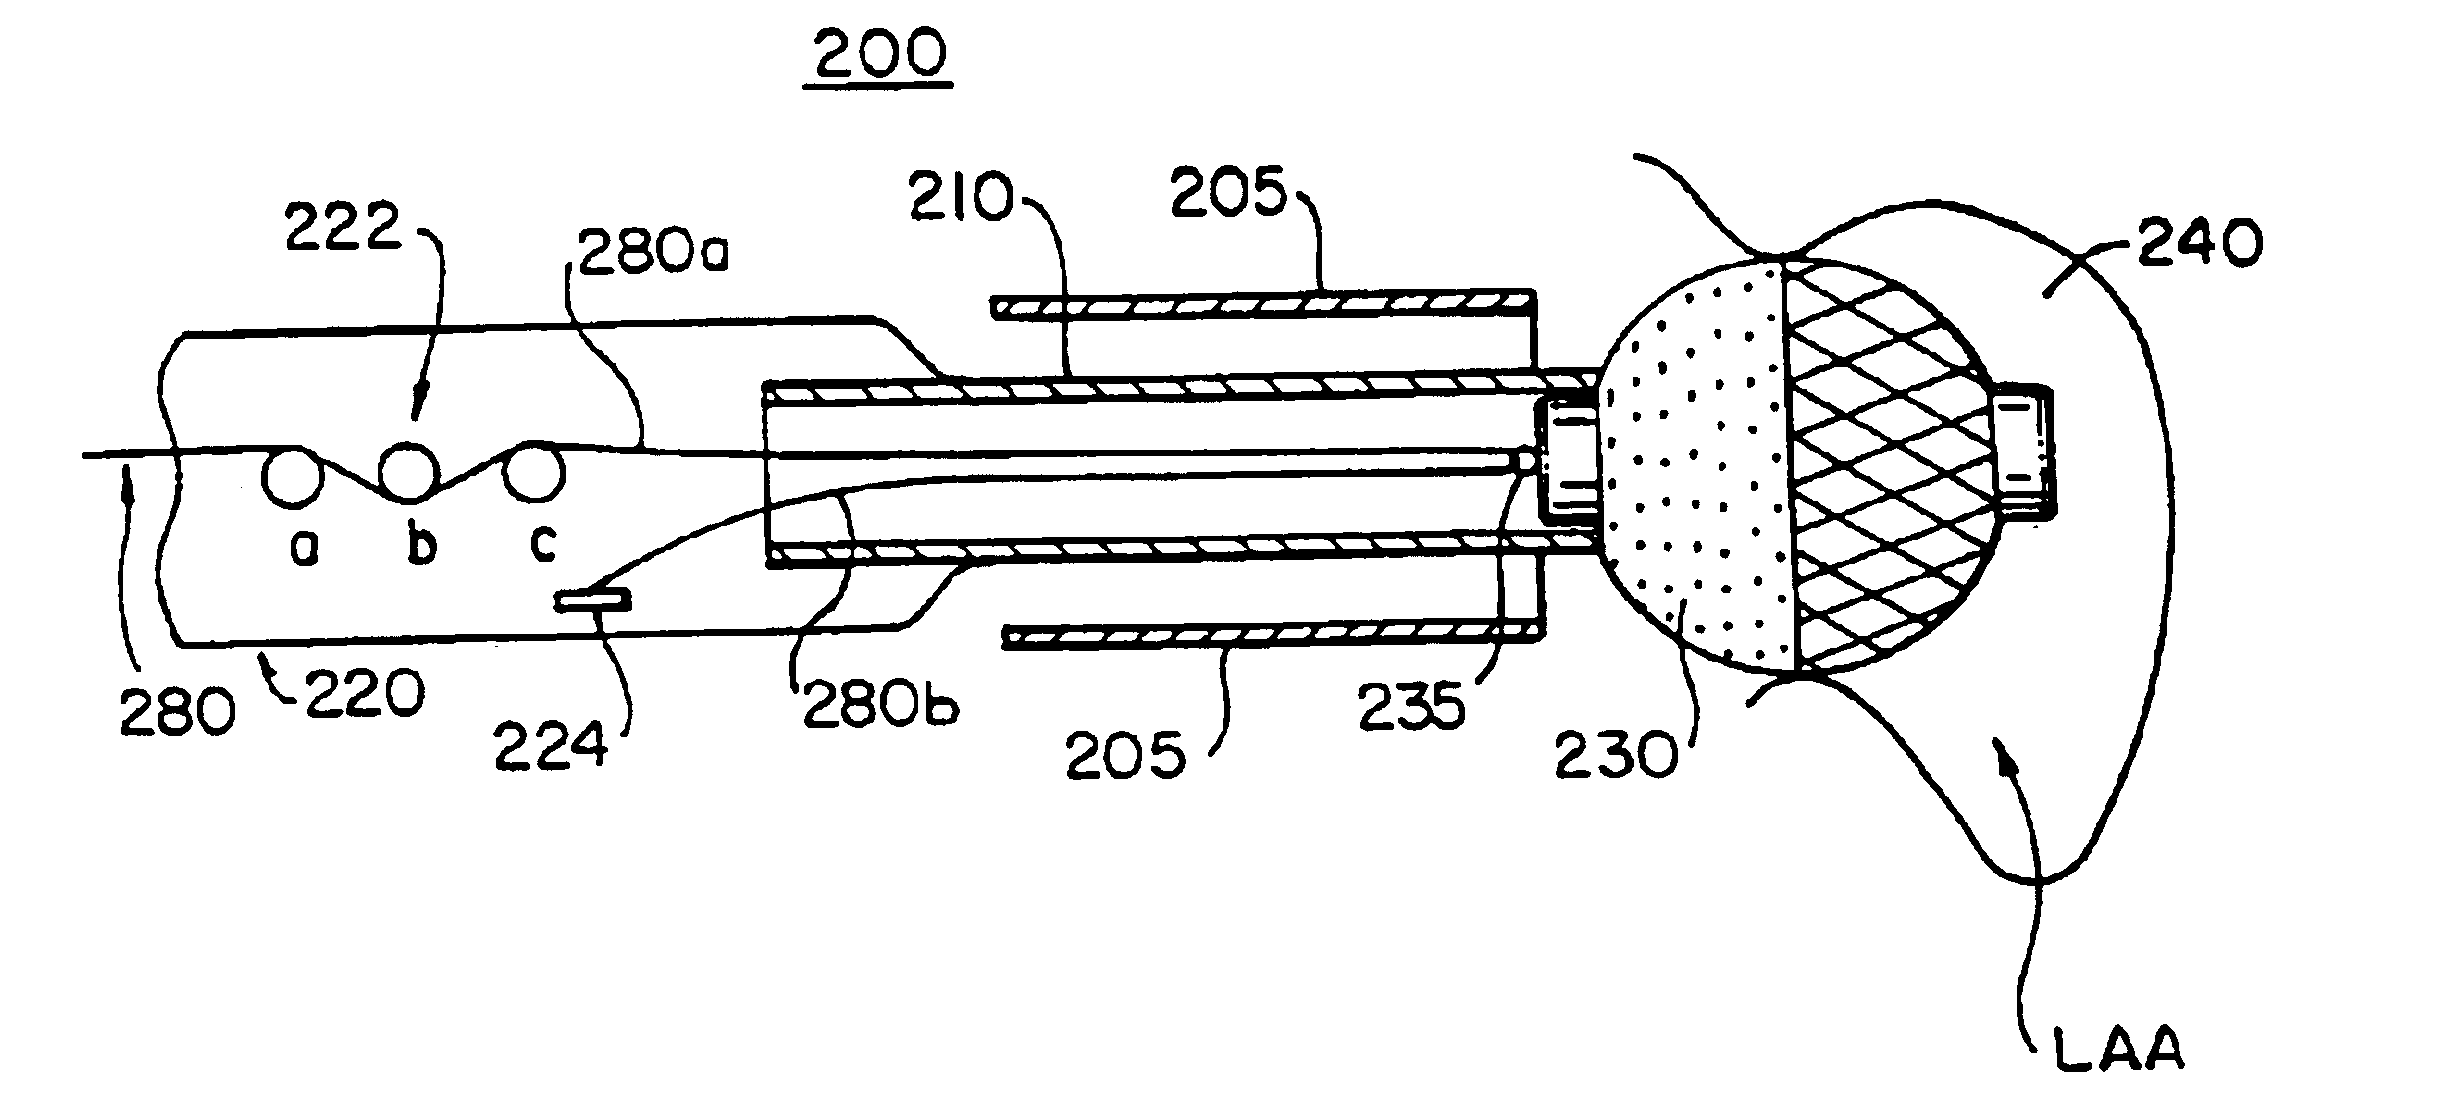 Cardiac implant device tether system and method